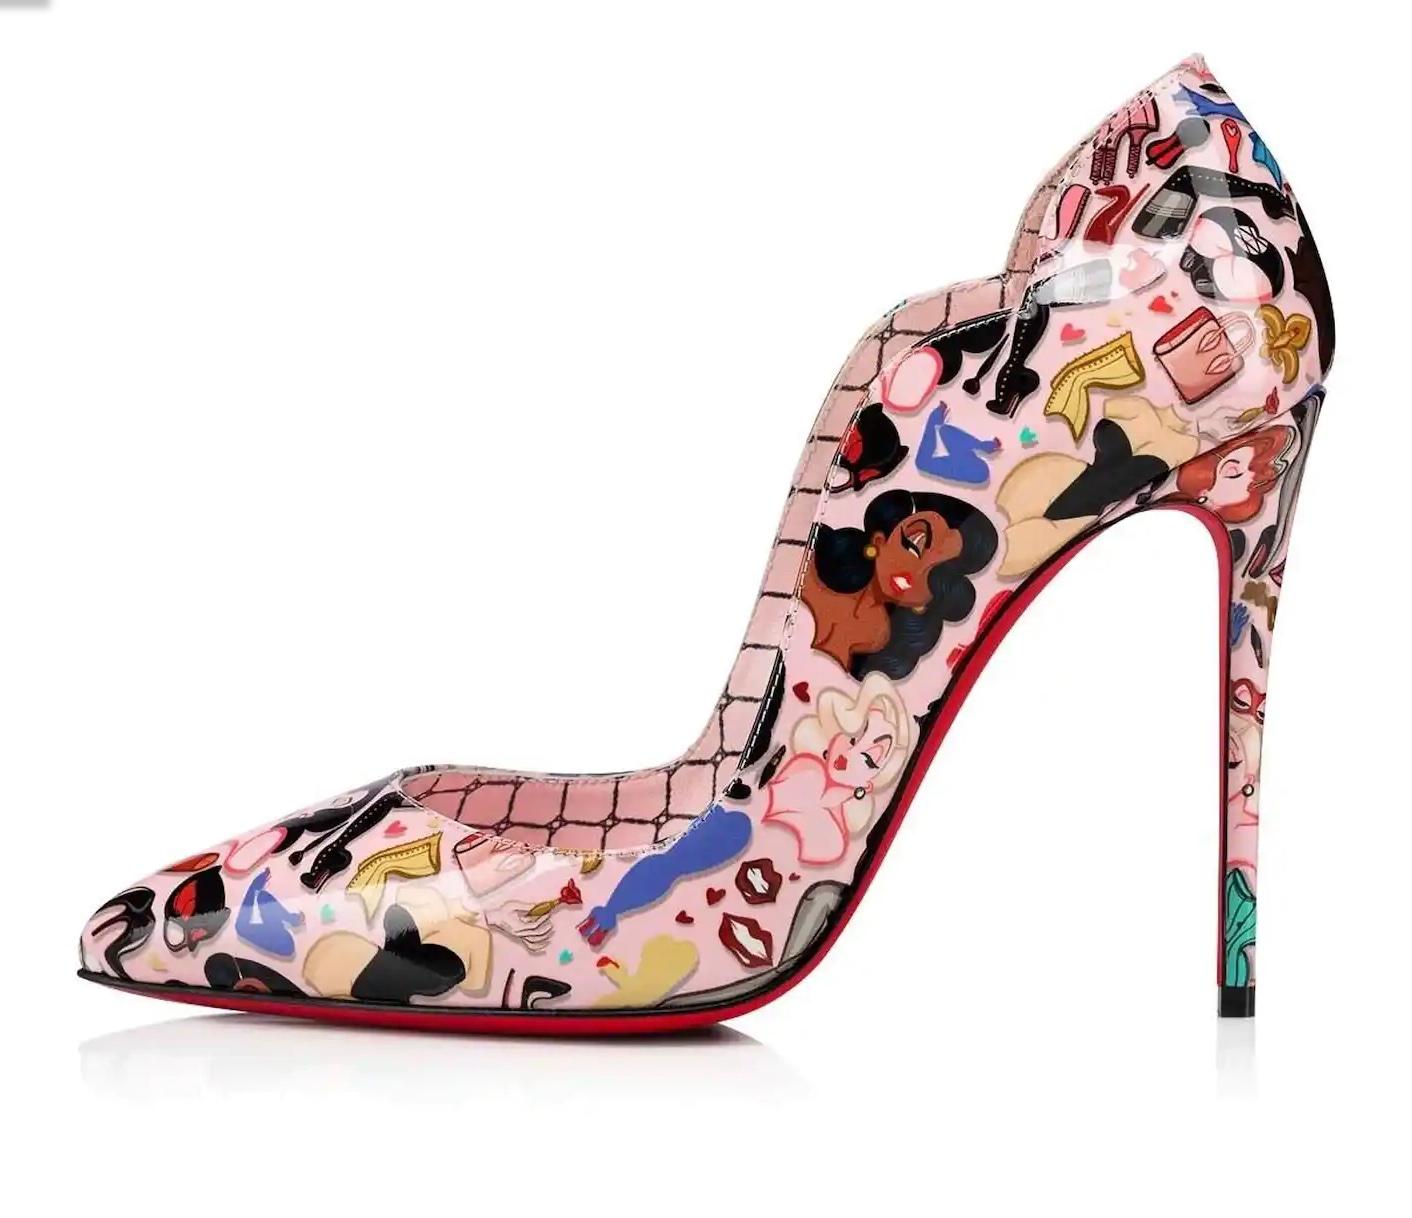 These Hot Chick pumps are envisioned through a multicoloured patent leather composition – showcasing the silhouette’s iconic curves, pointed toe and that flash of red that will be recognised in both an office and dancefloor setting. Brand new, never